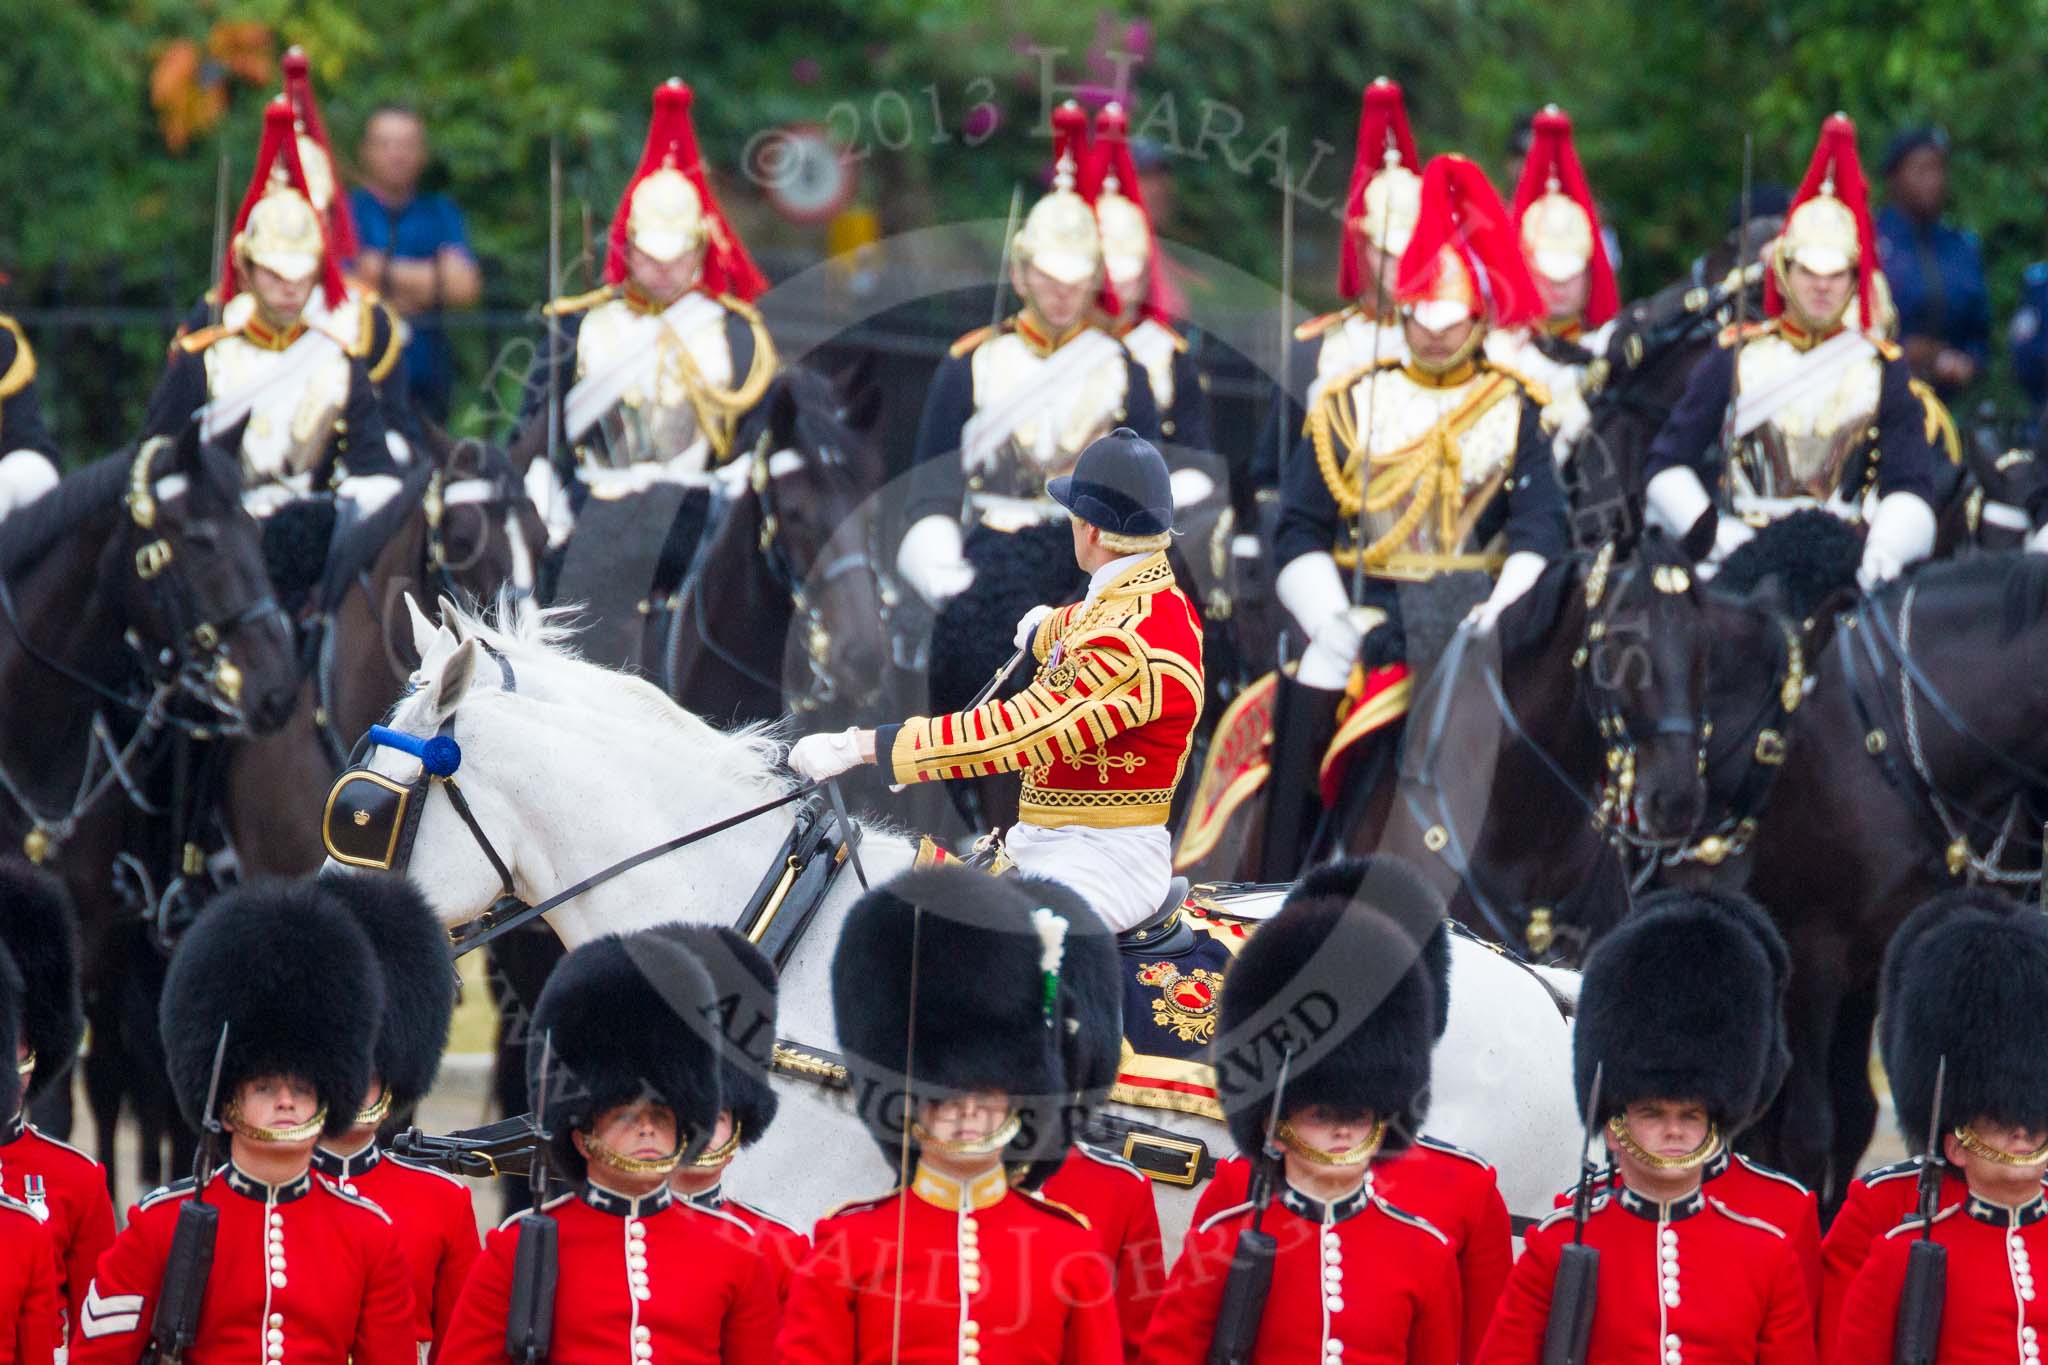 Trooping the Colour 2015. Image #286, 13 June 2015 11:03 Horse Guards Parade, London, UK